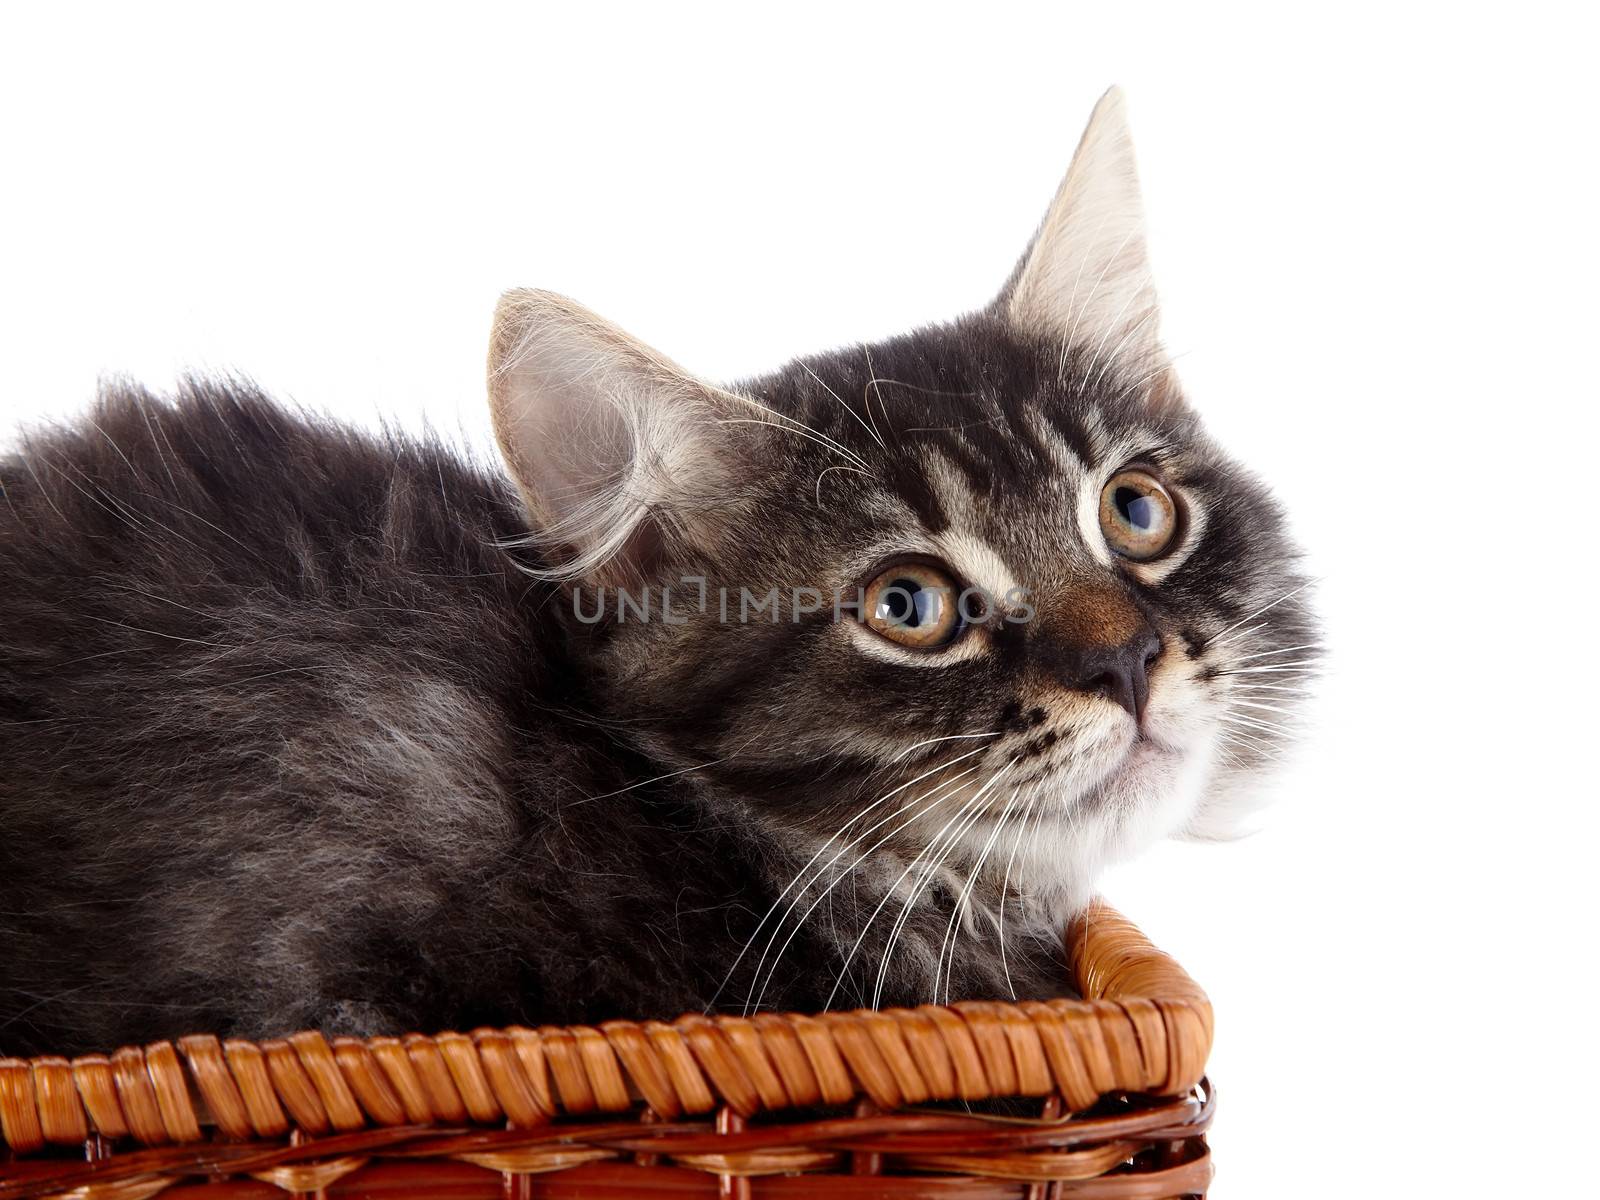 Fluffy cat  in a wattled basket. Fluffy cat with brown eyes.  Striped not purebred kitten. Kitten on a white background. Small predator. Small cat.